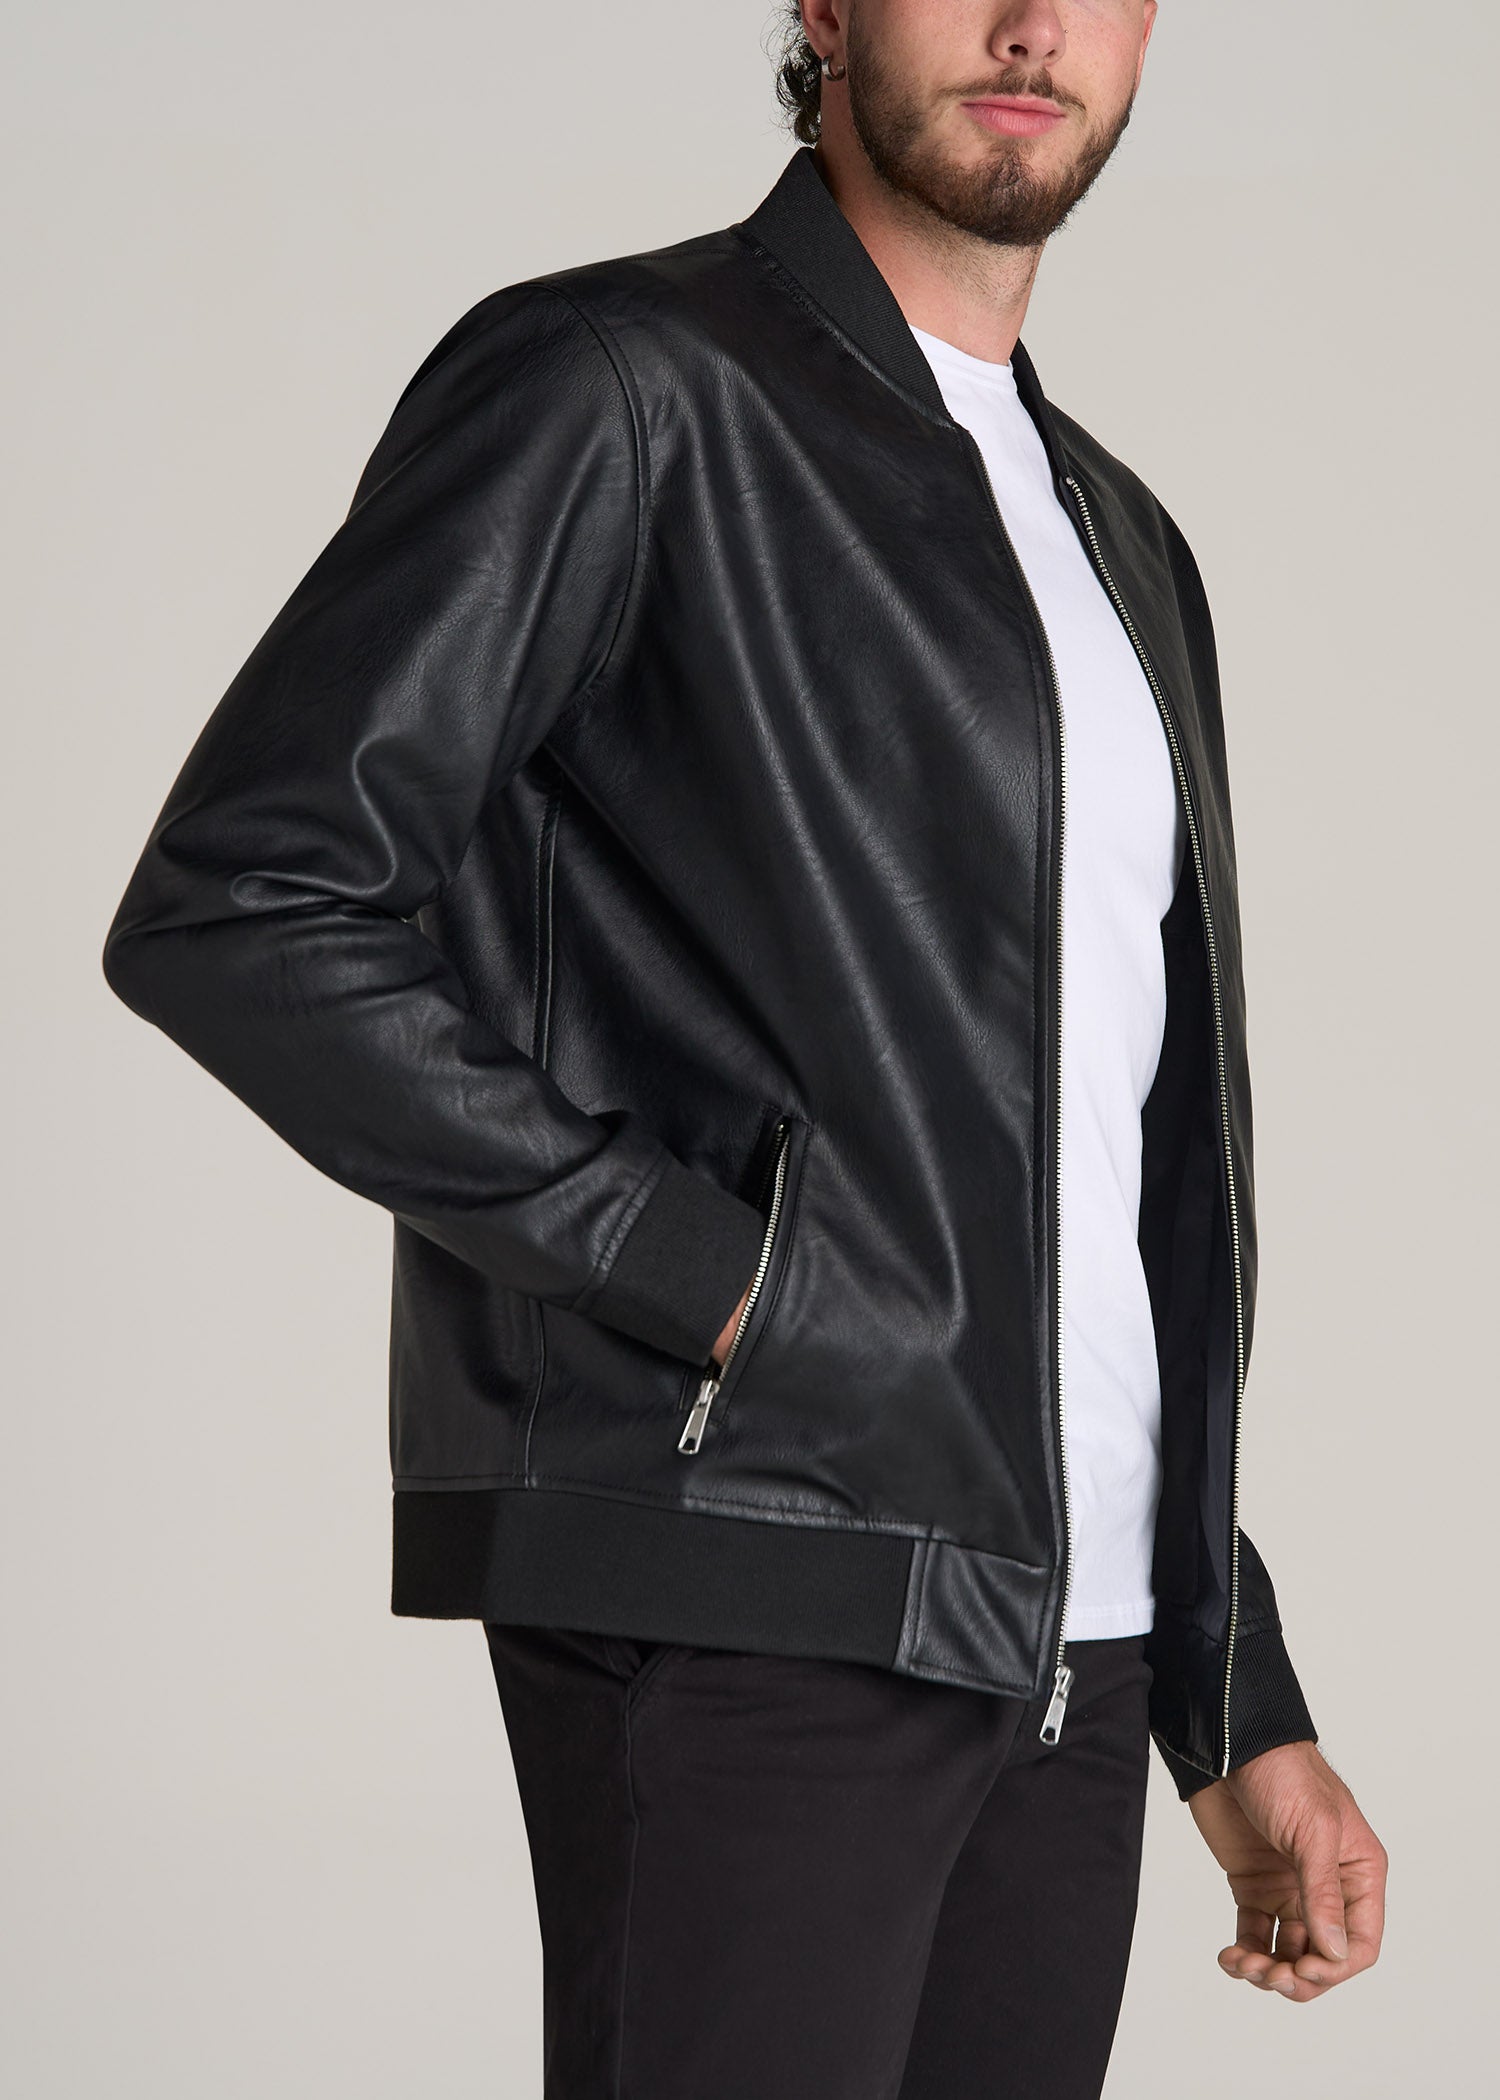 American-Tall-Men-Faux-Leather-Bomber-Jacket-Black-side